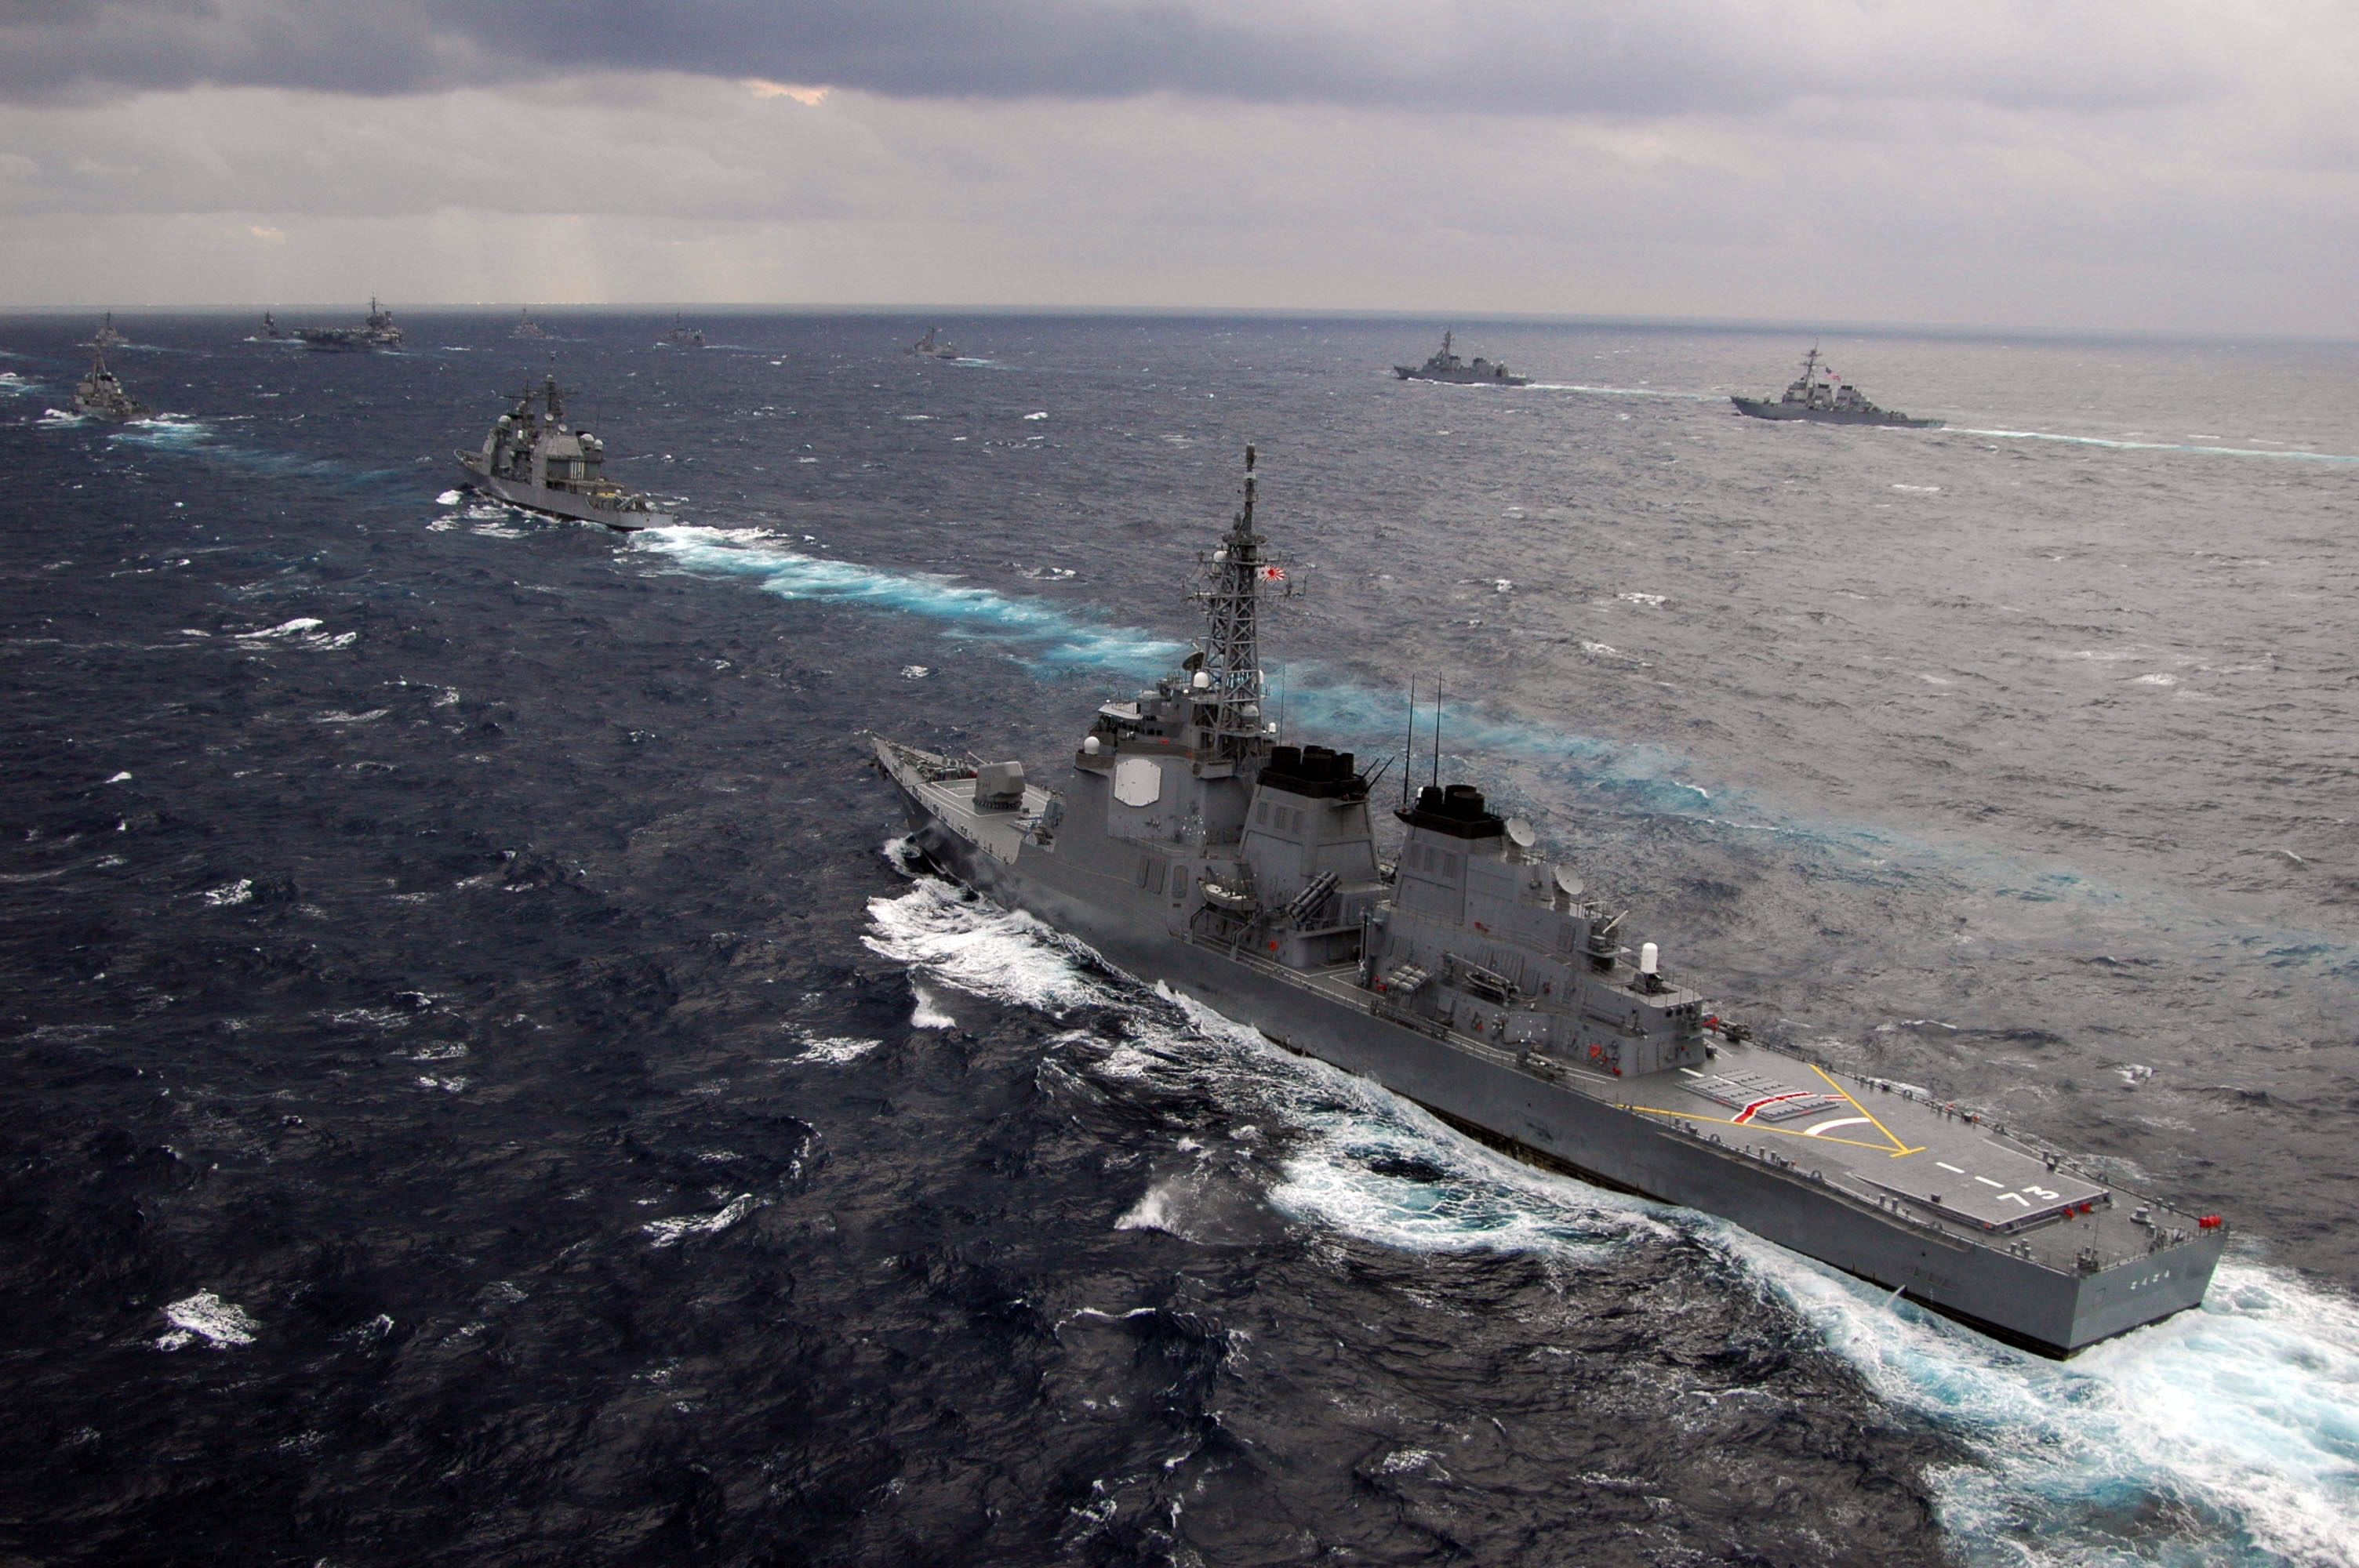 US_Navy_051115-N-8492C-125_The_Japan_Maritime_Self-Defense_Force_(JMSDF)_destroyer_JDS_Kongou_(DDG_173)_sails_in_formation_with_other_JMSDF_ships_and_ships_assigned_to_the_USS_Kitty_Hawk_Carrier_Strike_Group.jpg